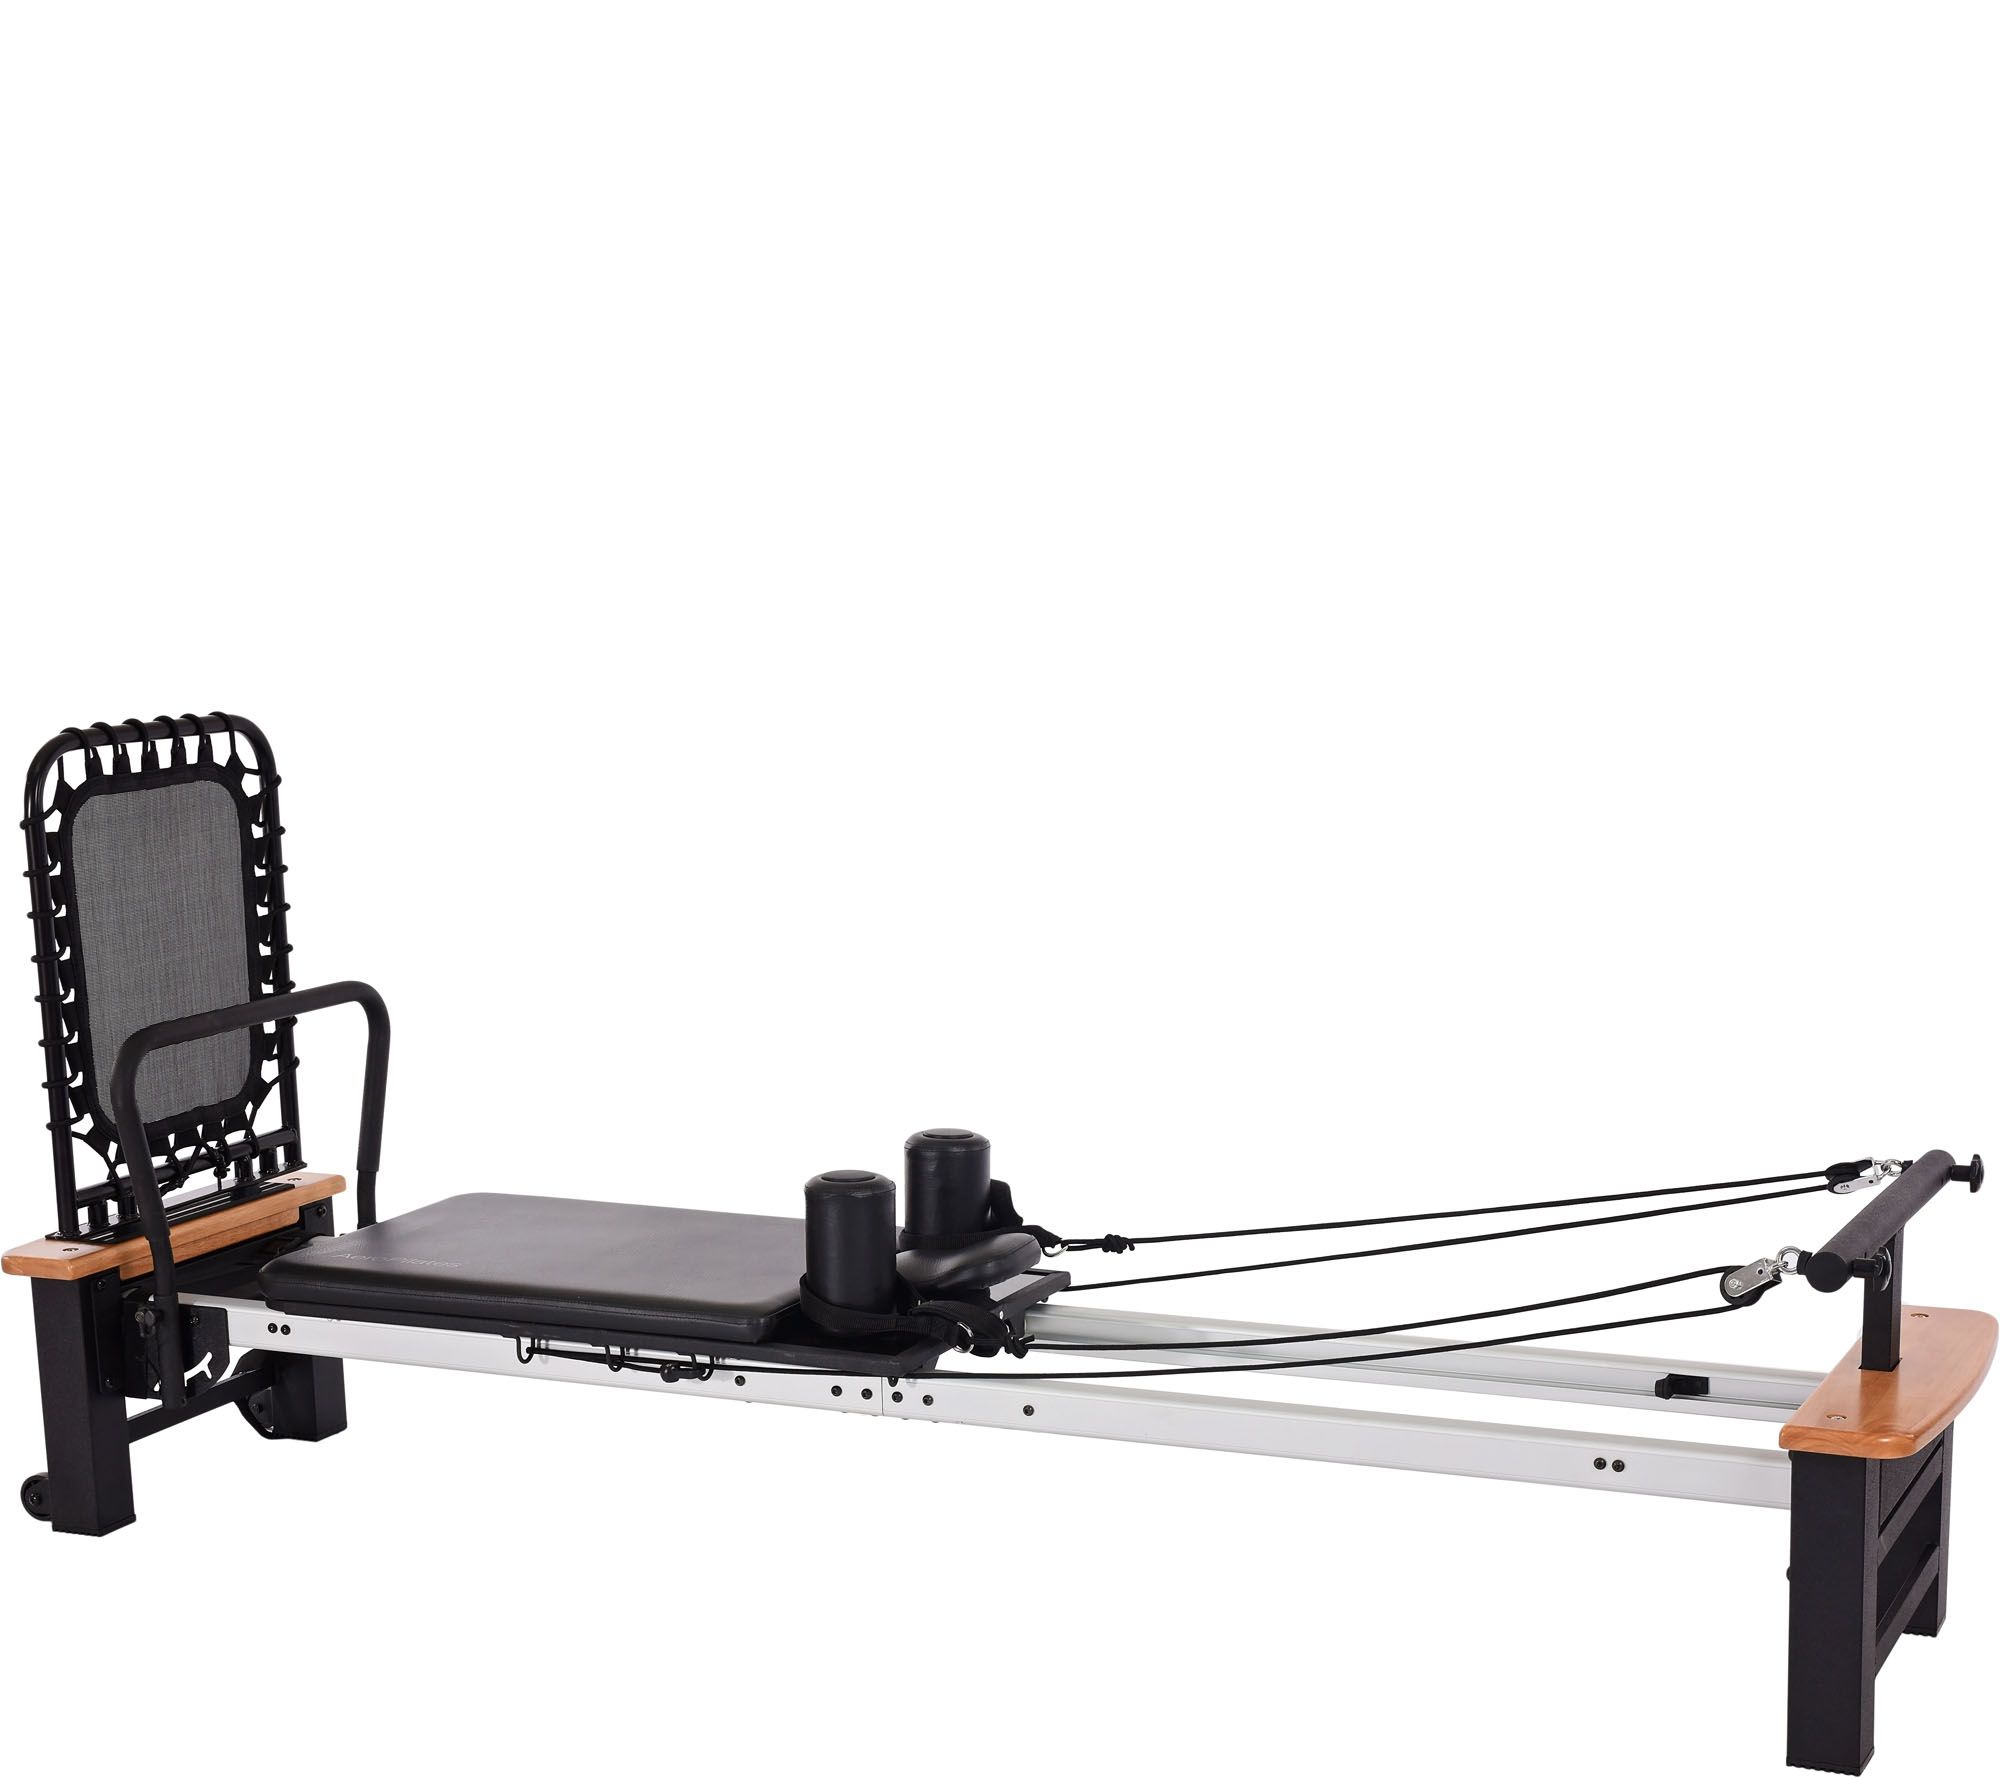 Aero Pilates machine - general for sale - by owner - craigslist